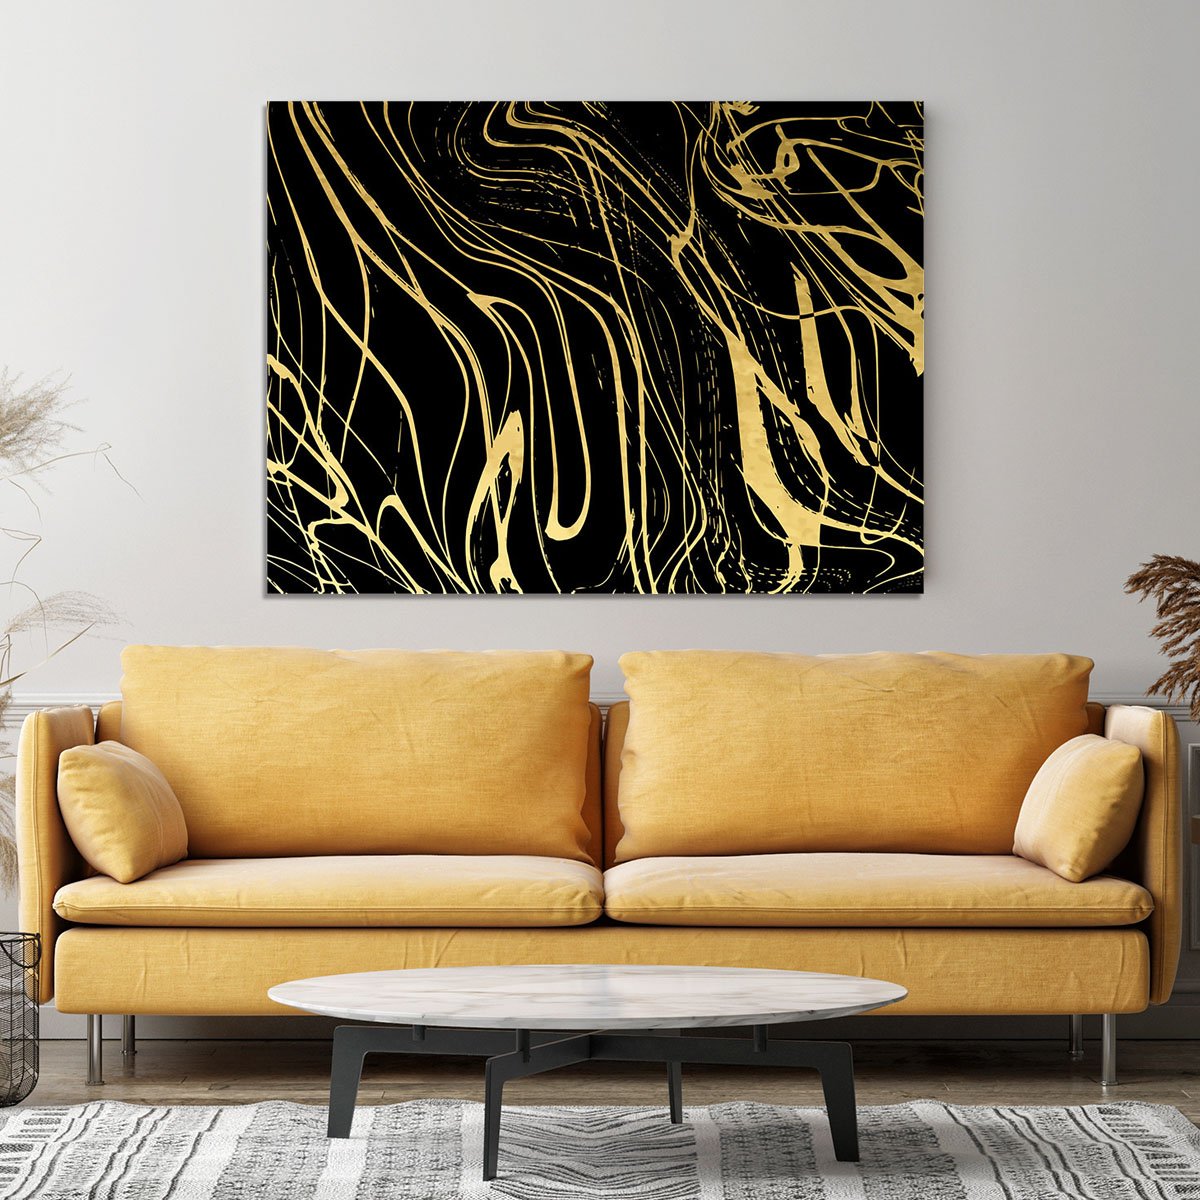 Black and Gold Swirled Abstract Canvas Print or Poster